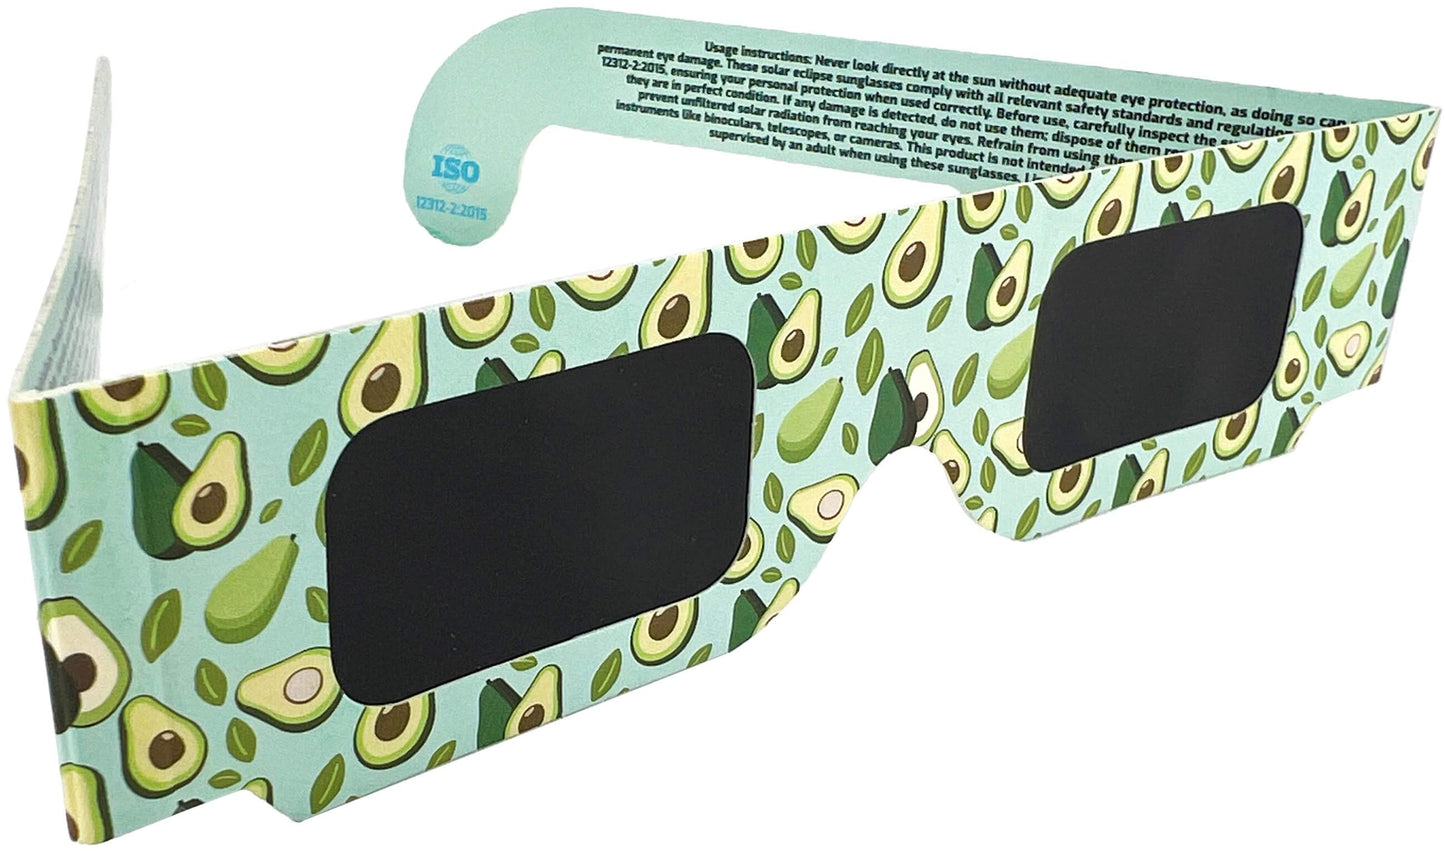 Solar Eclipse Glasses - Fit-Over - One Size - Pink, Turquoise, Yellow, Black